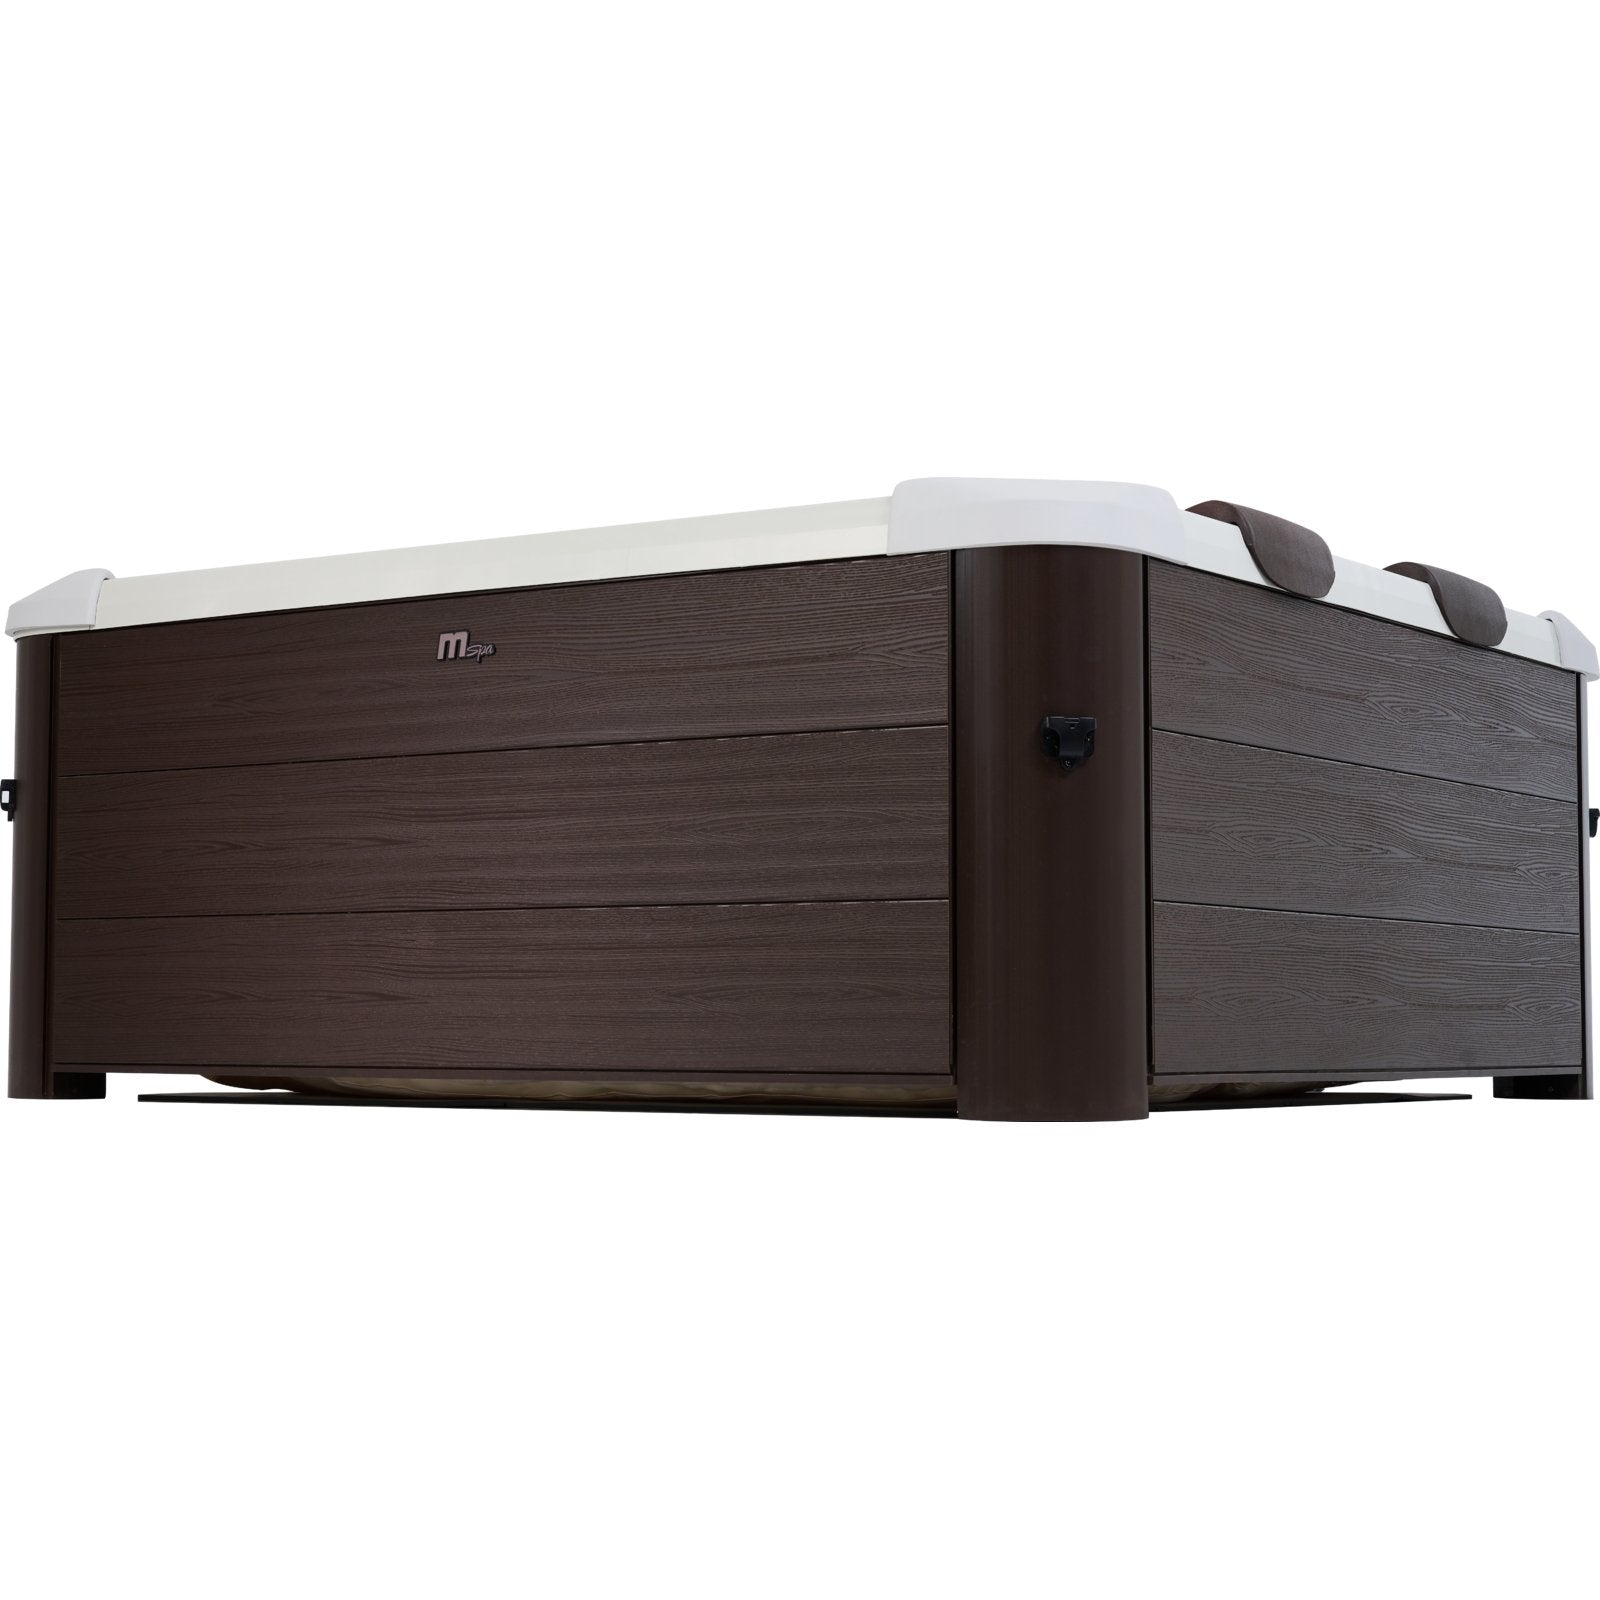 MSPA FRAME TRIBECA 6 Person Spa Hot Tub Spa - Purely Relaxation